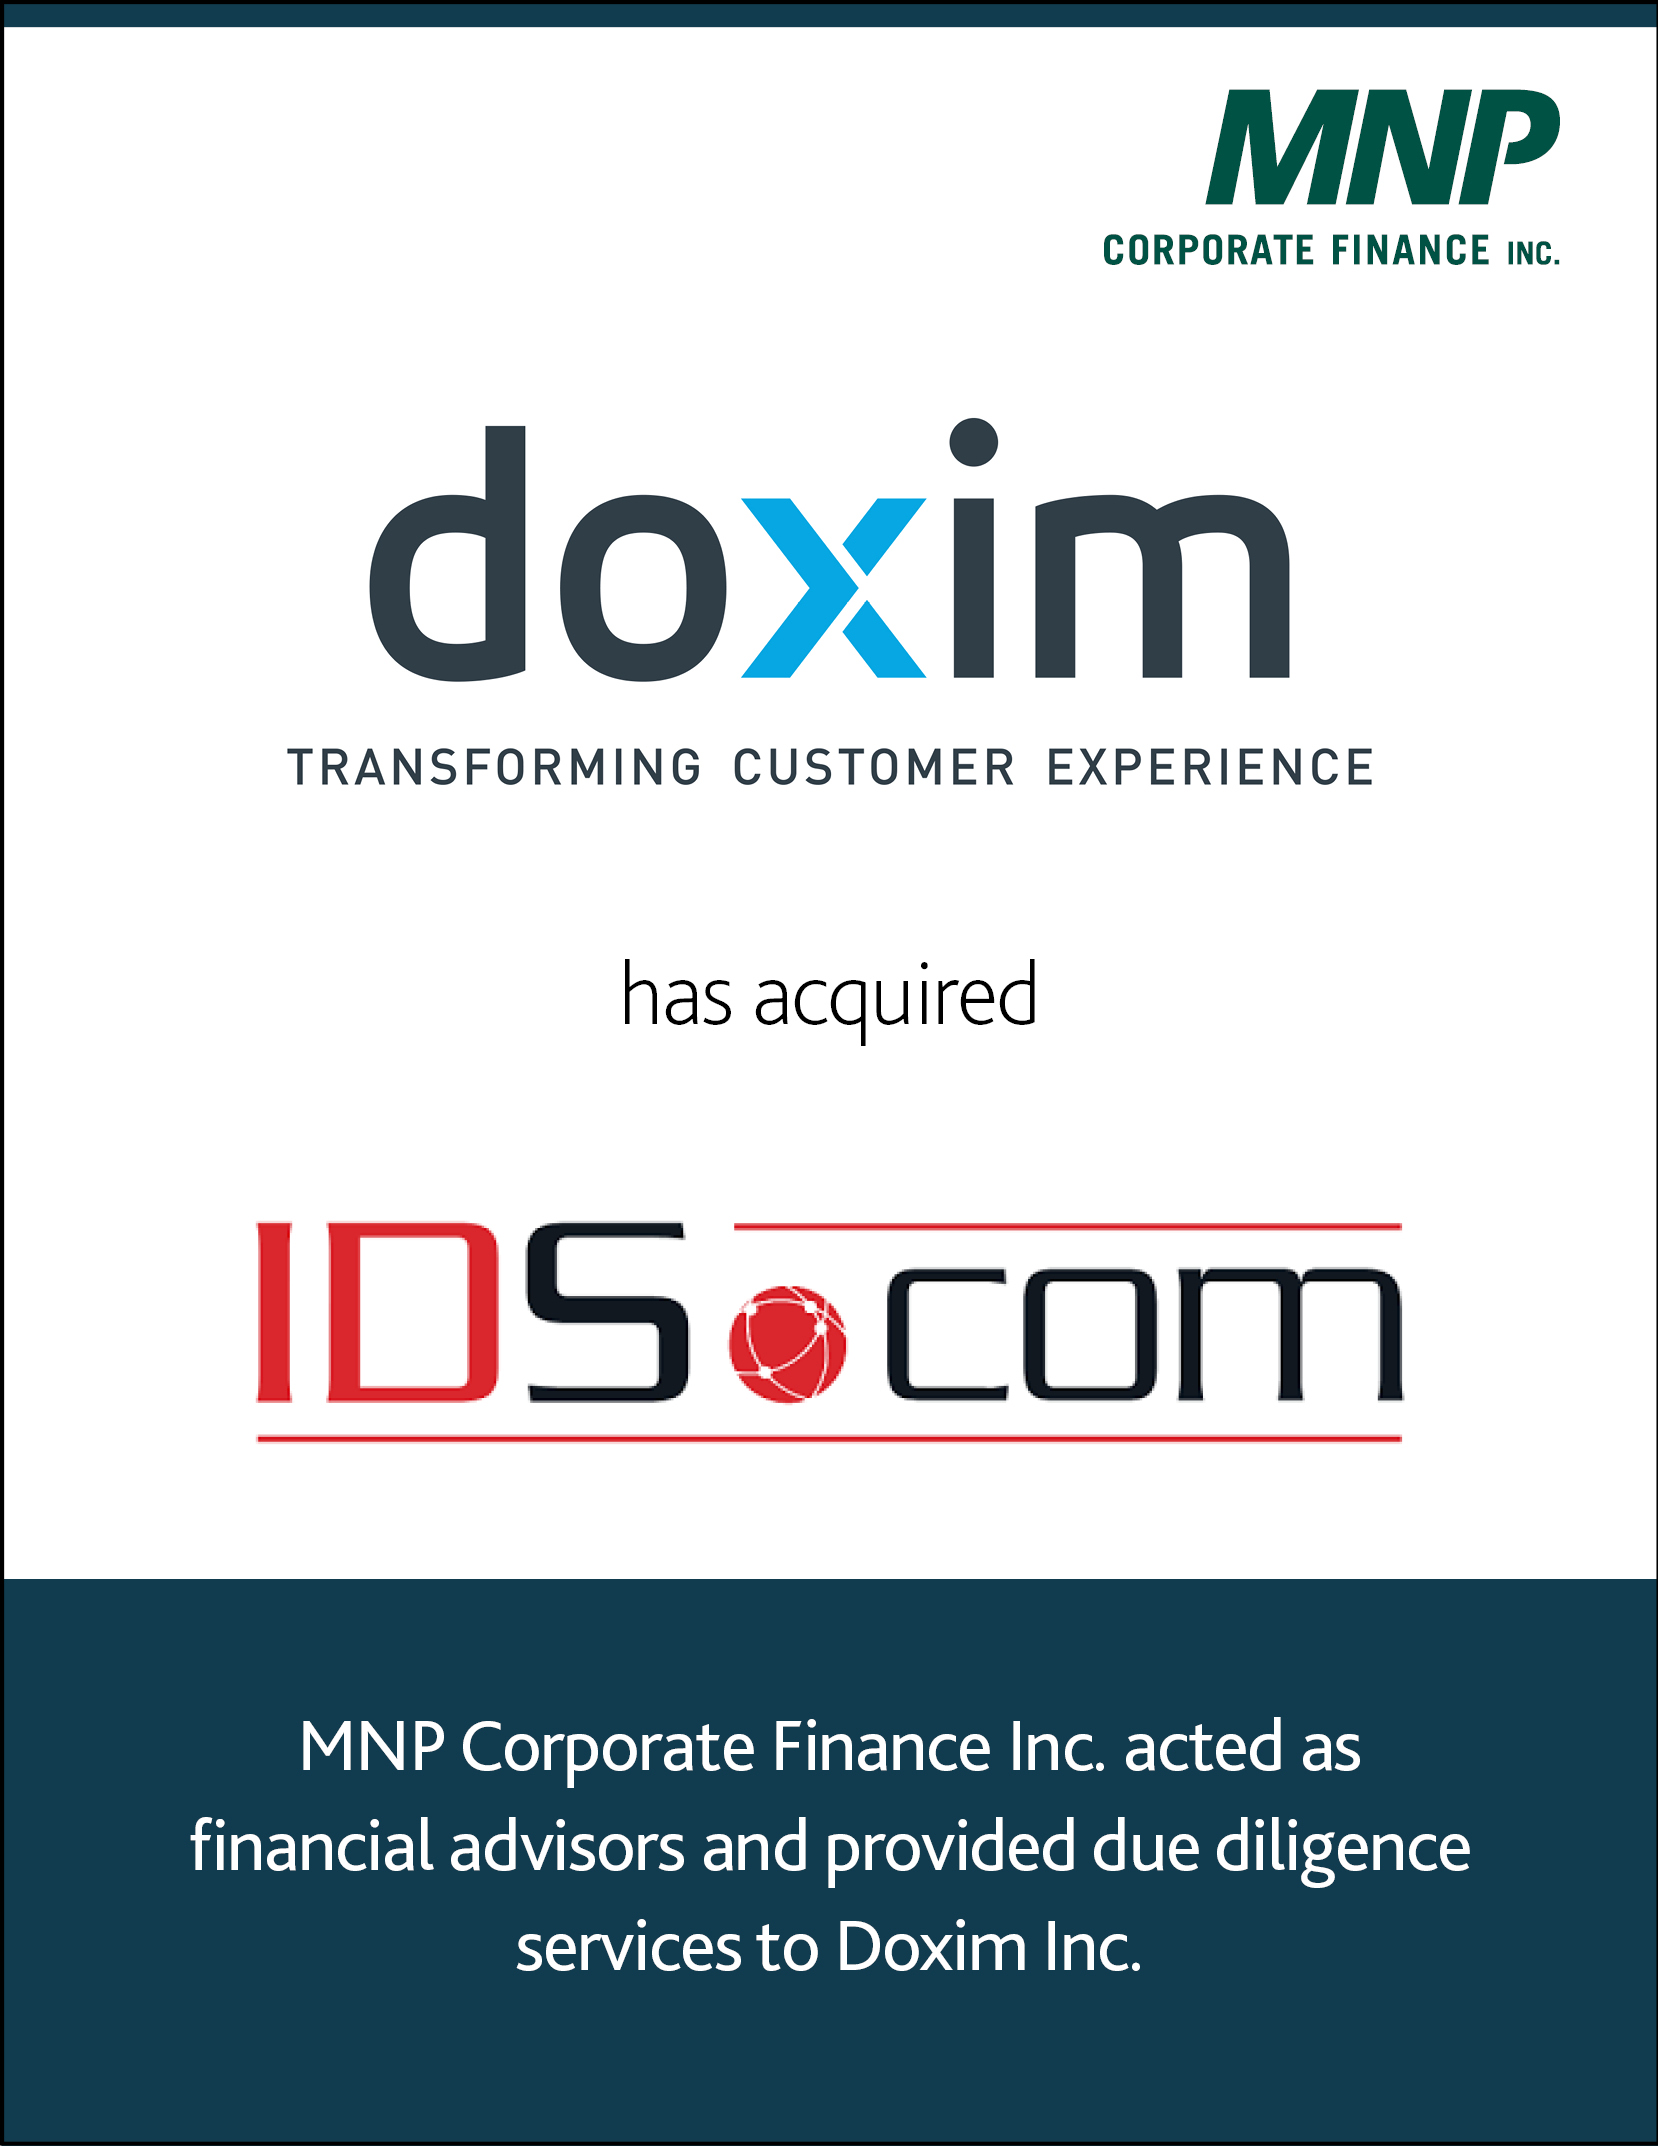 Doxim has acquired IDS.com. MNP Corporate Finance Inc. acted as financial advisors and provided due diligence services to Doxim Inc.